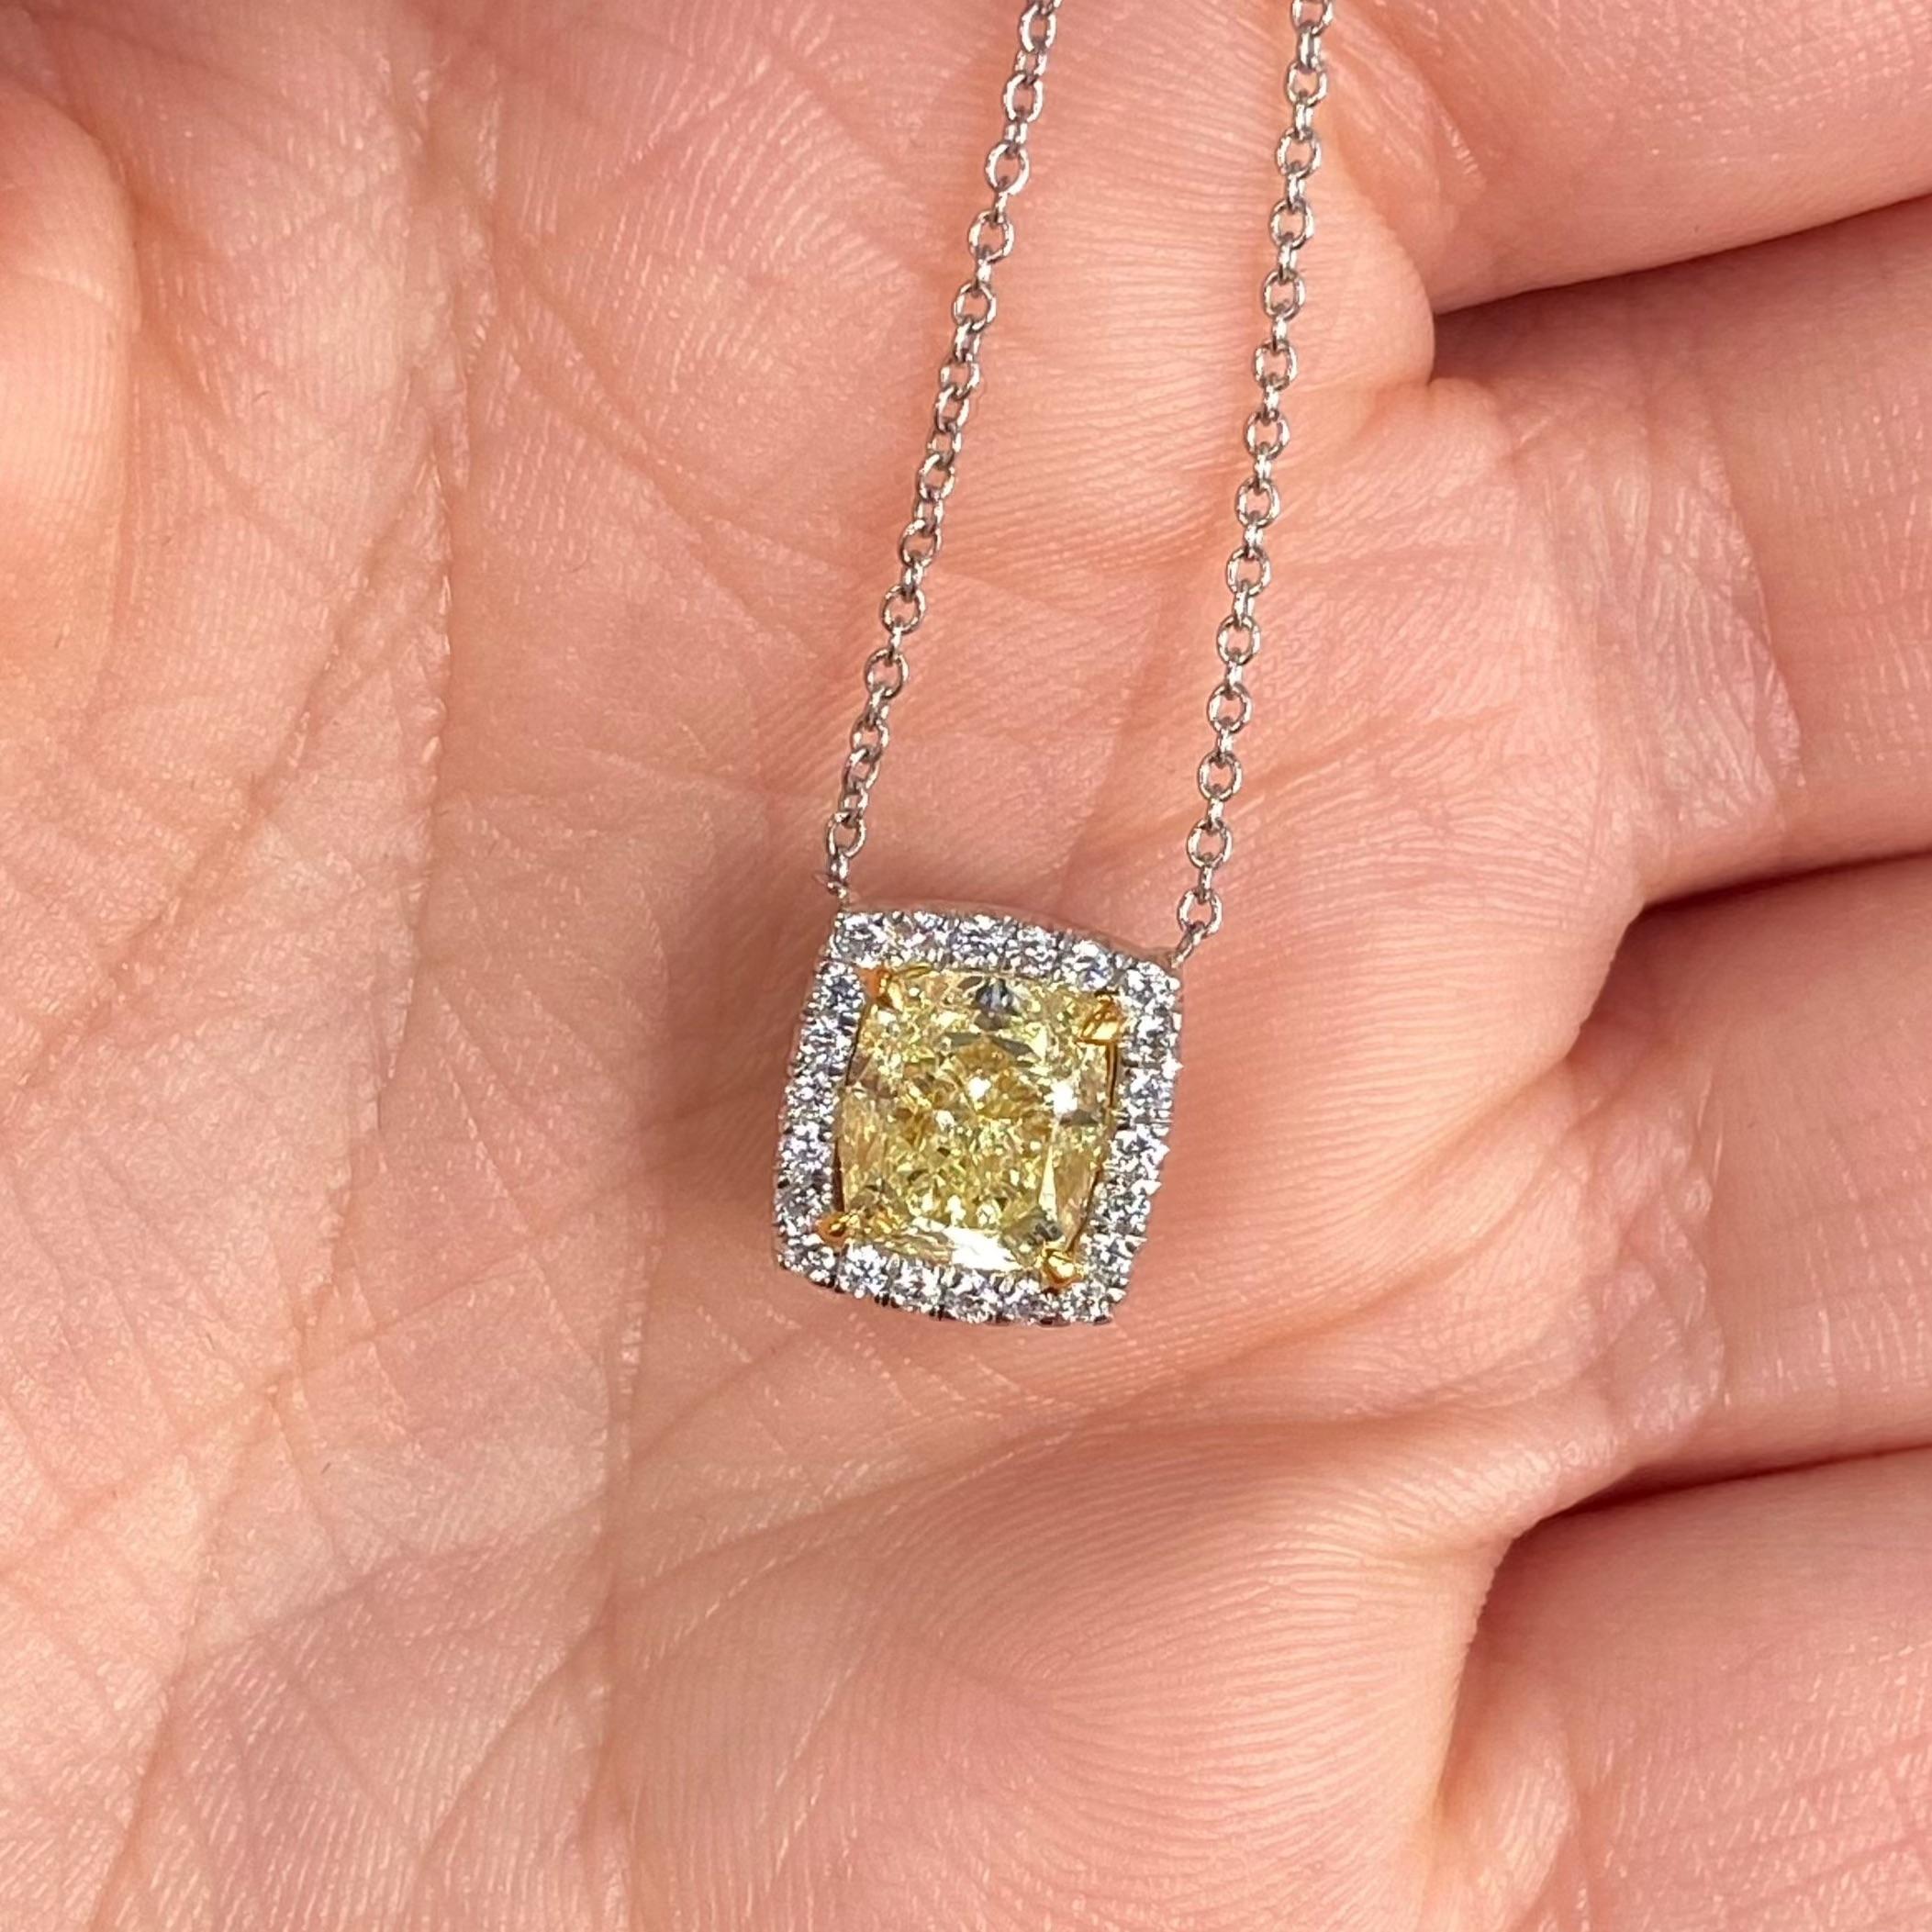 2.19 Carat Total Weight
2.00 Carat Center Diamond
Fancy Light Yellow
VS2 Clarity
GIA Certified Diamond
Excellent, Very Good Cutting
Medium Blue Fluorescence
Set in 18k Gold
Handmade in NYC
18 Inch chain

This piece can be viewed before purchase in